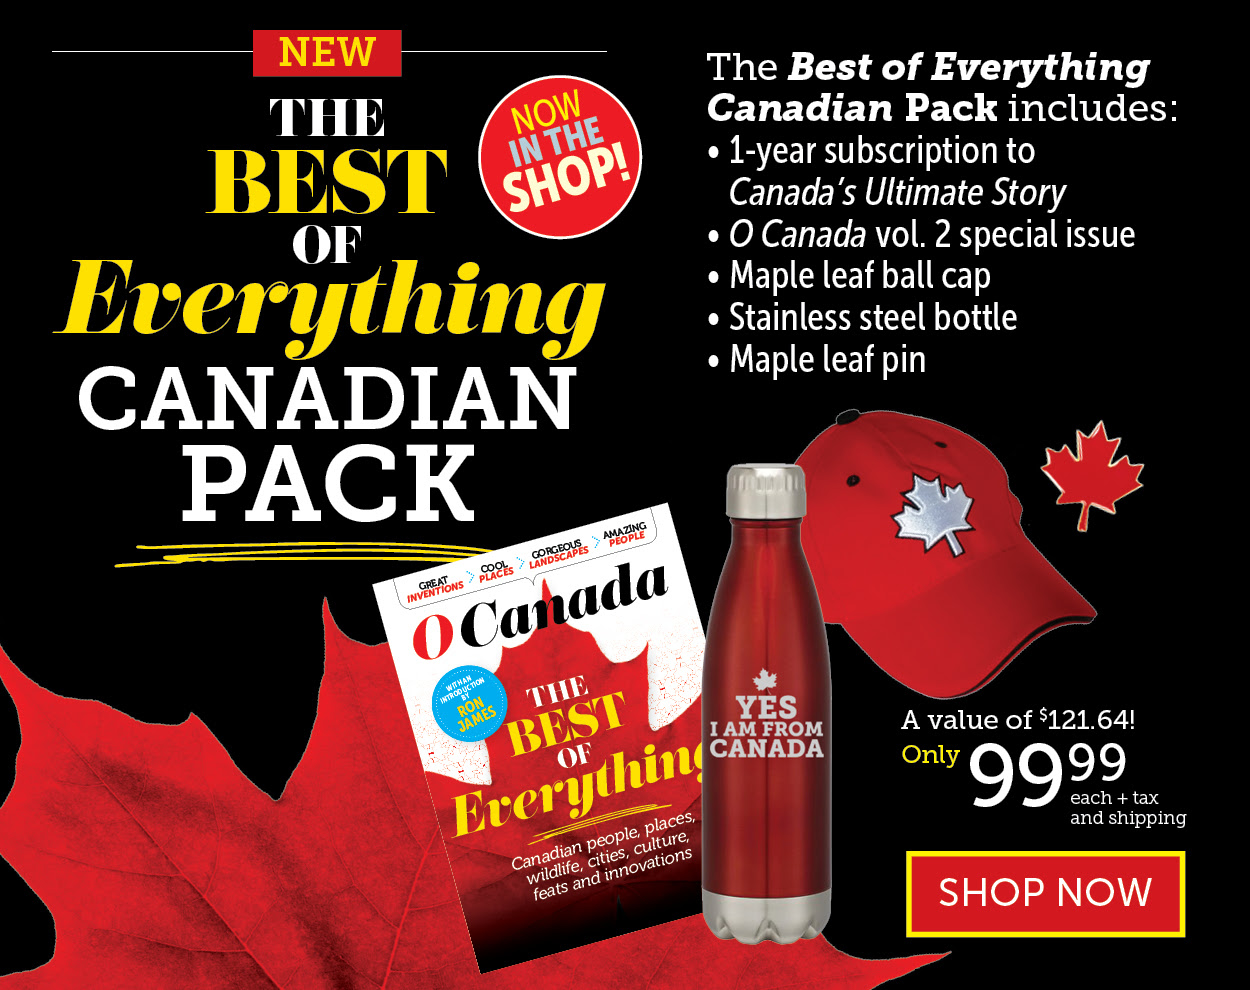 The Best of Everything Canadian Pack!